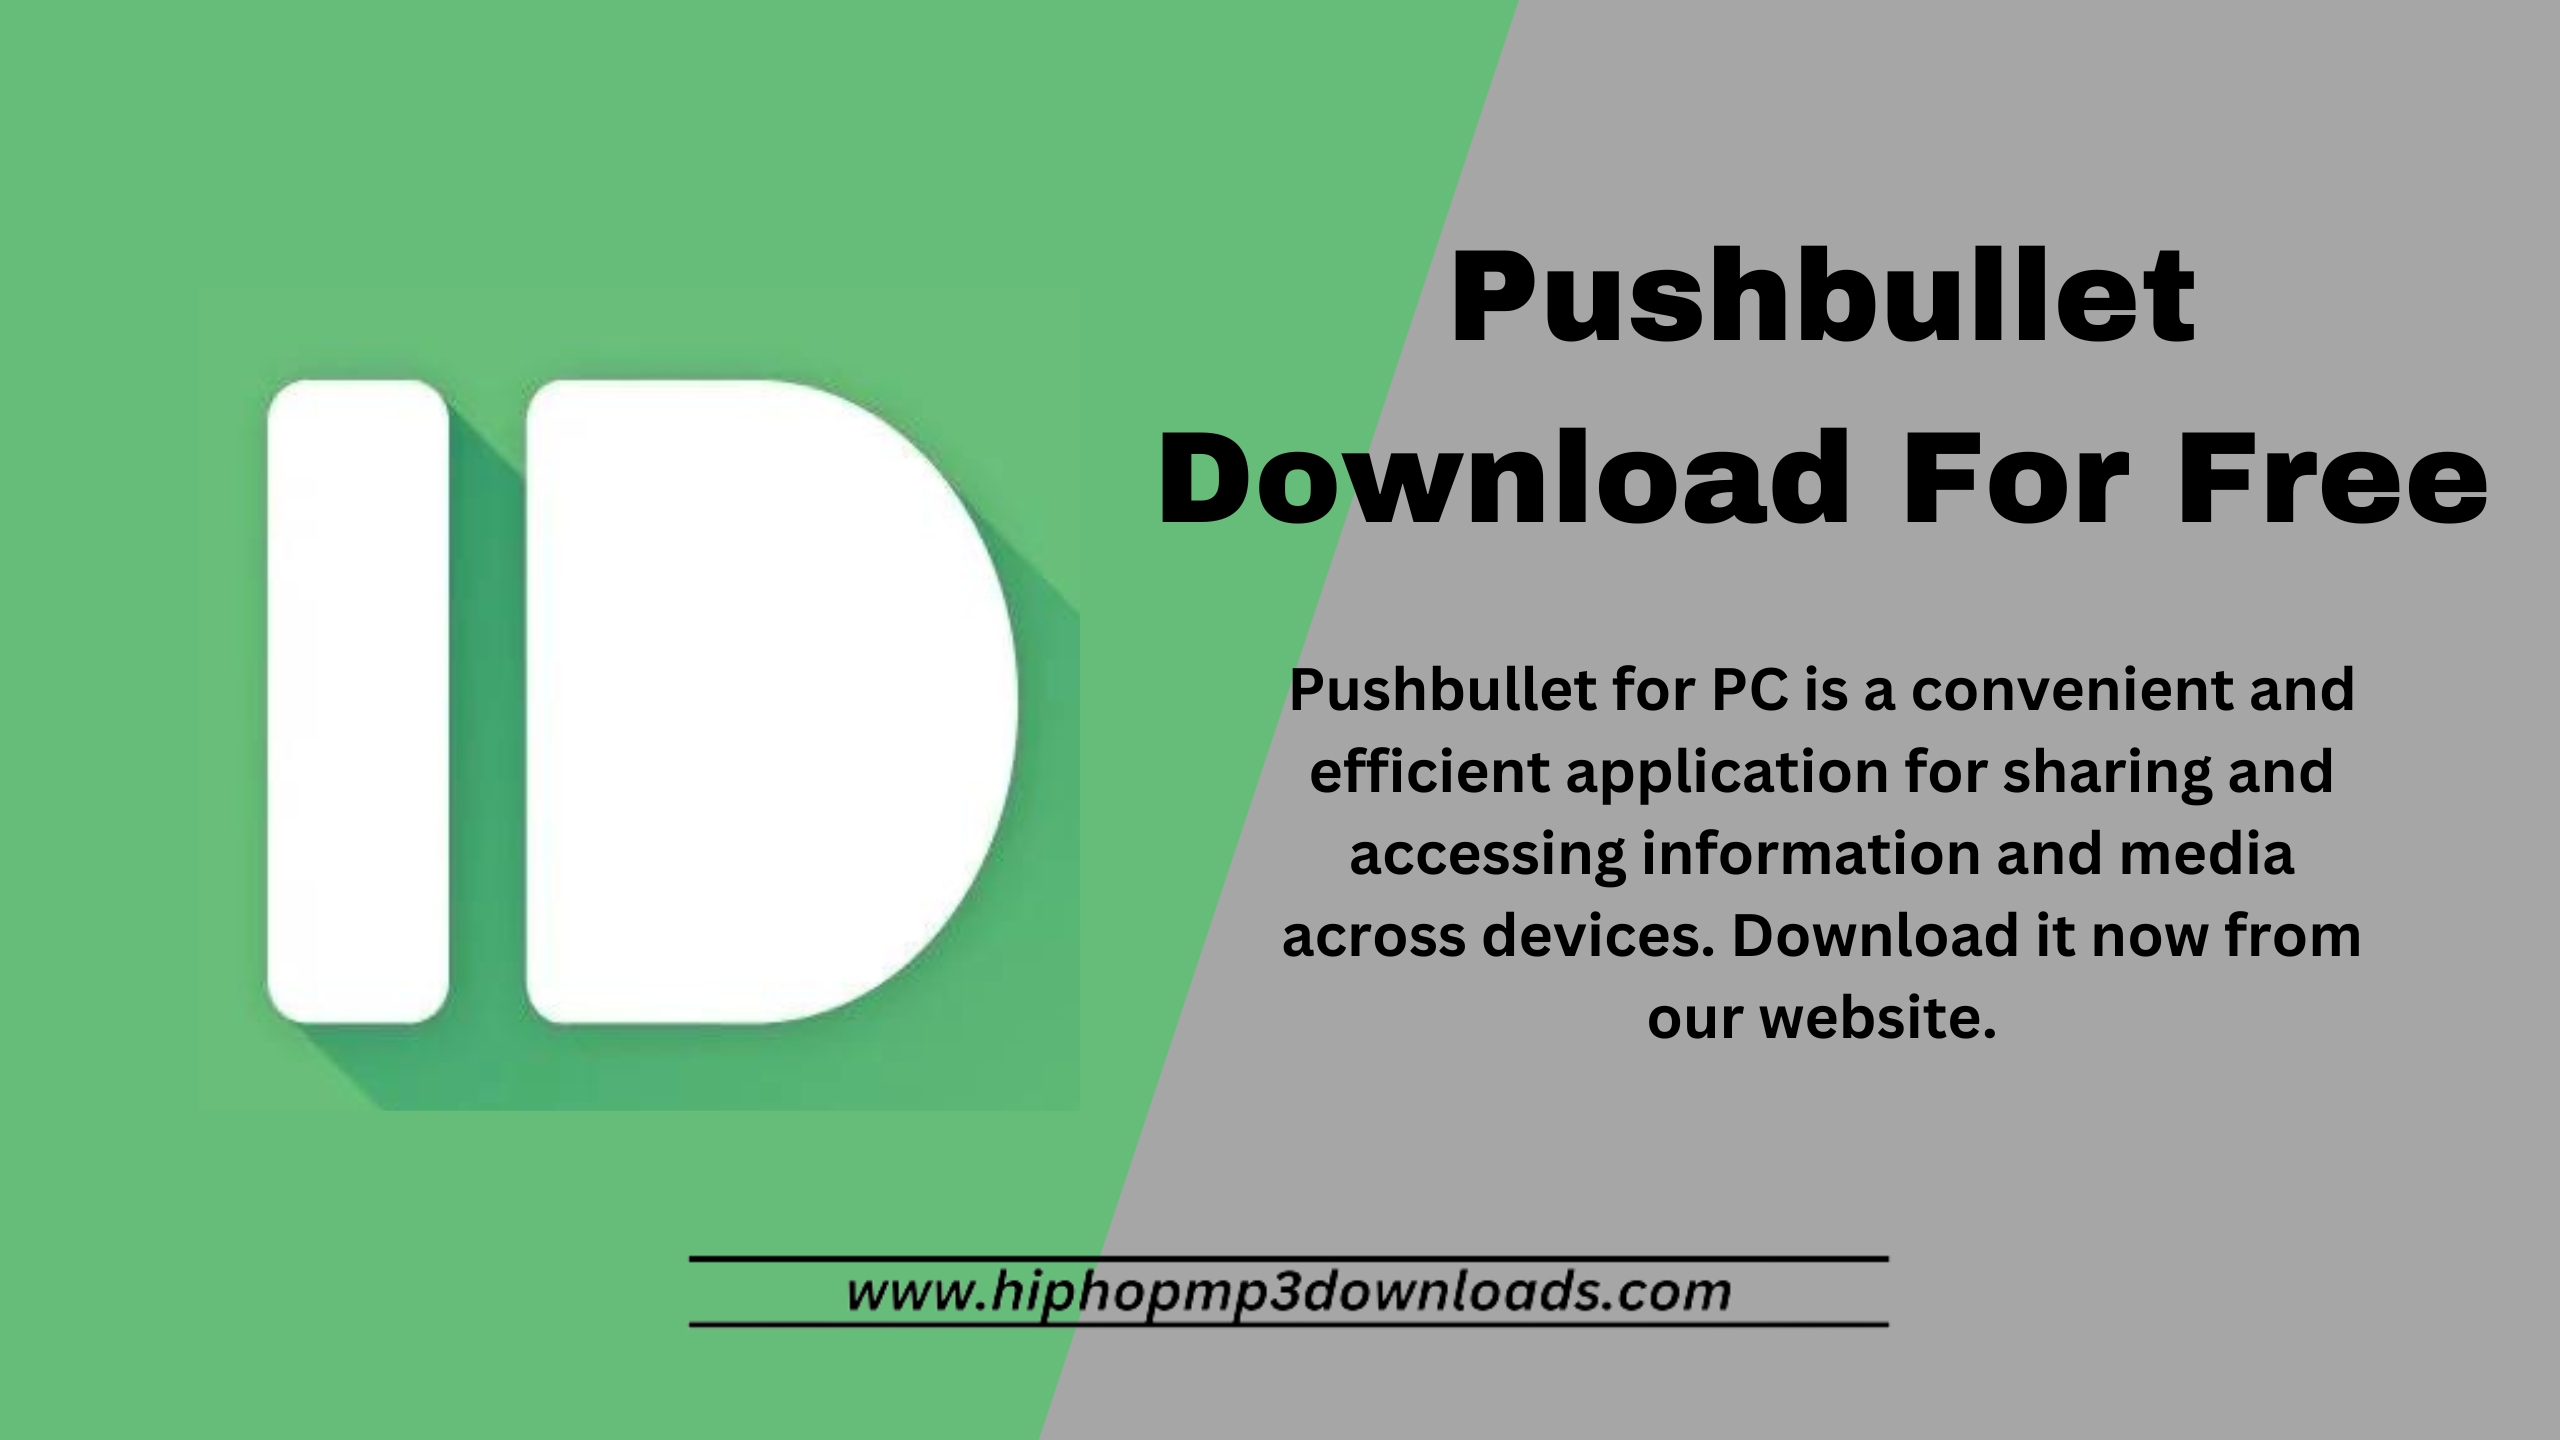 Pushbullet Download For Free